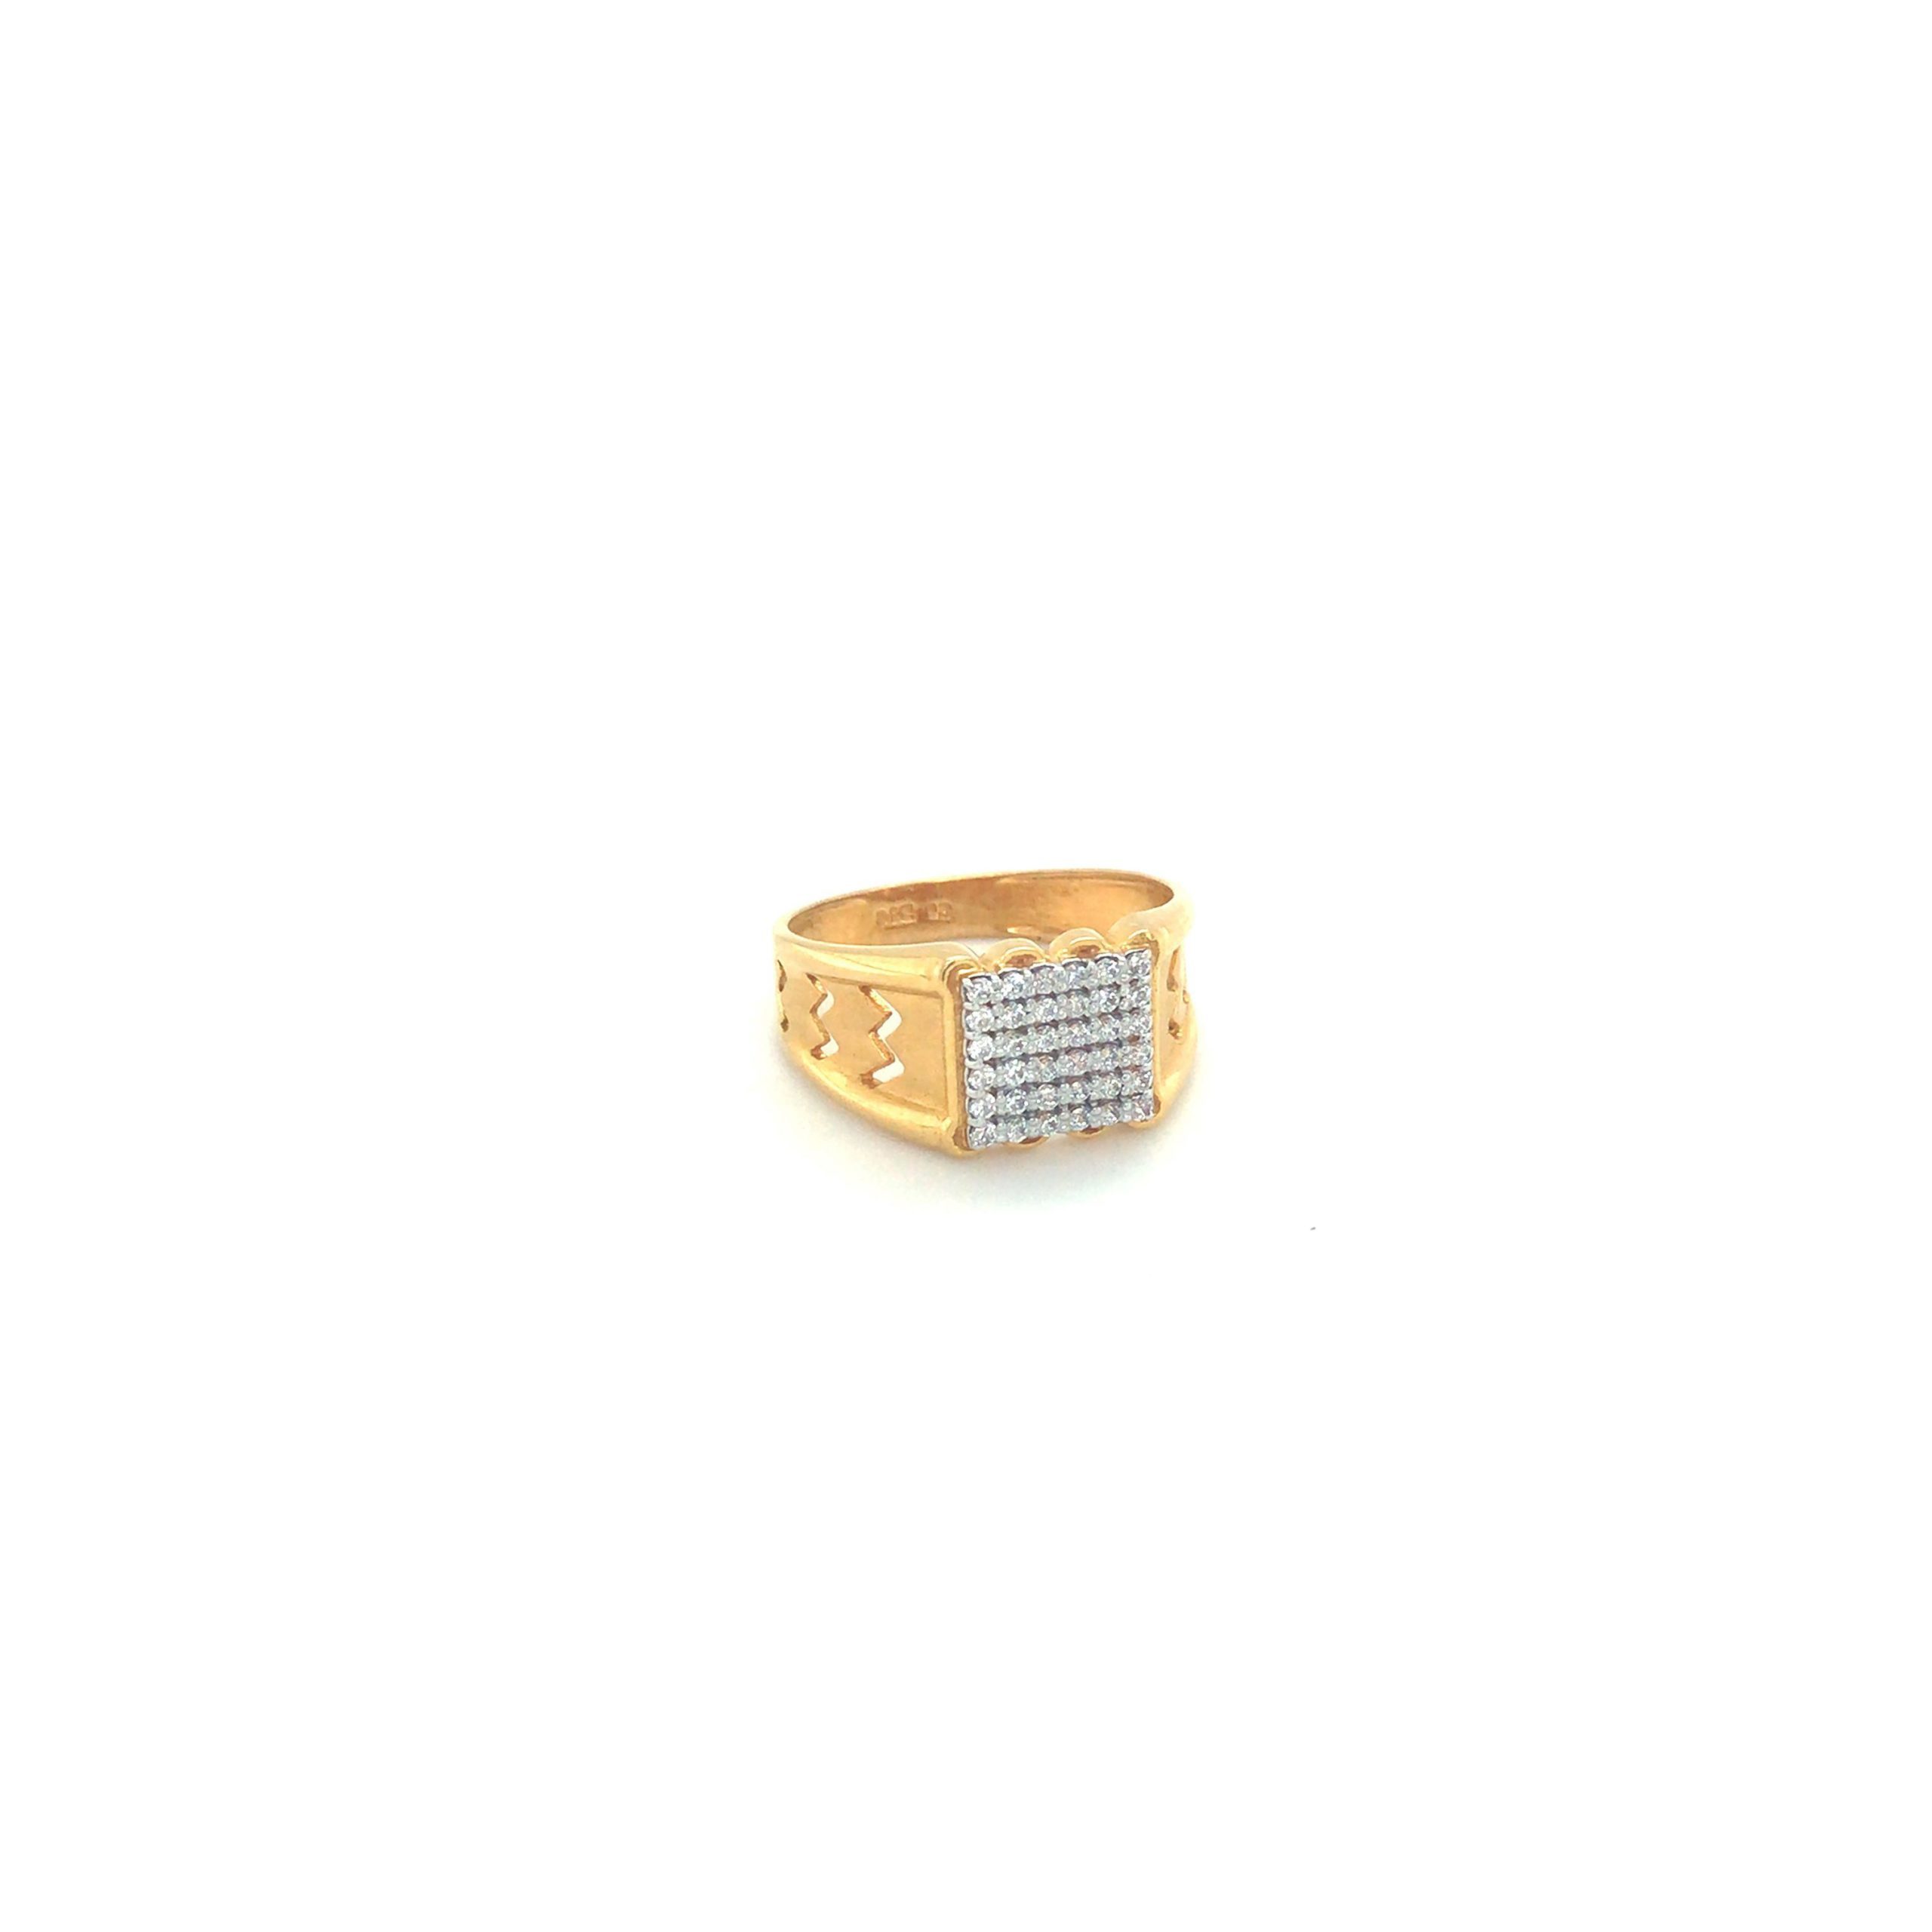 Yellow Tourmaline Sterling Silver and 22k Gold Ring Size 7.5